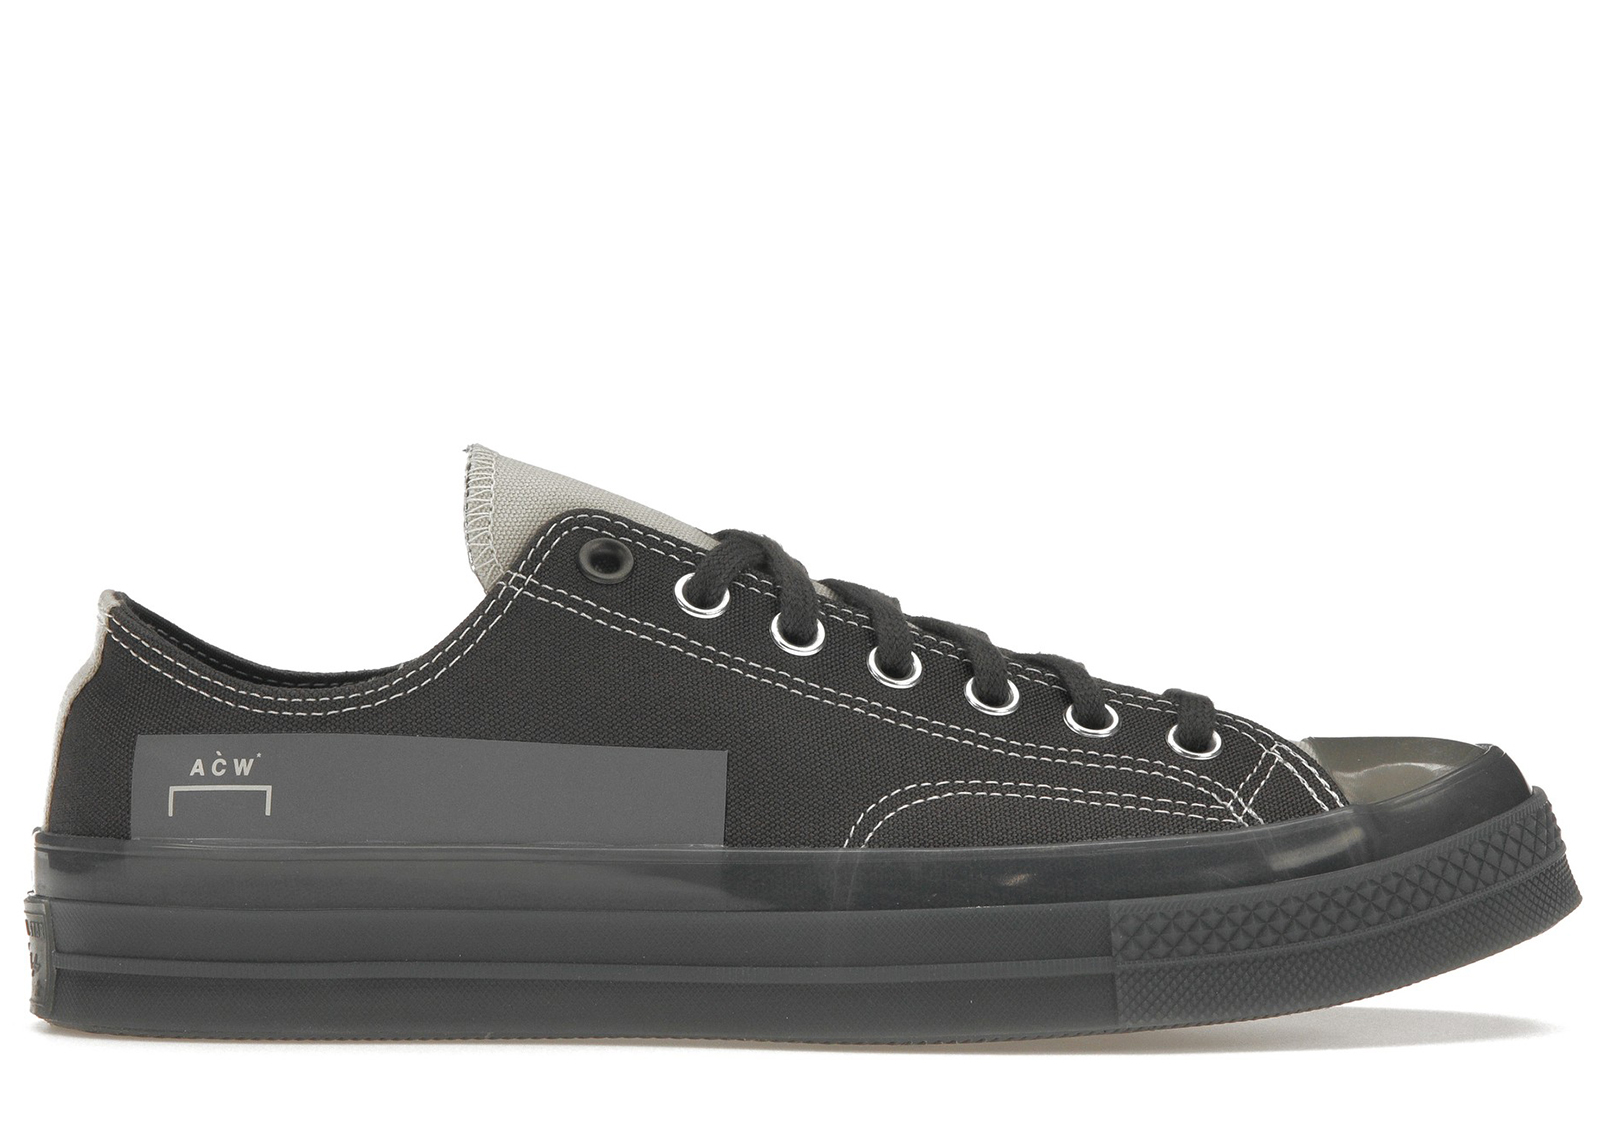 Converse Chuck Taylor All Star 70 Ox A-COLD-WALL Pavement Men's